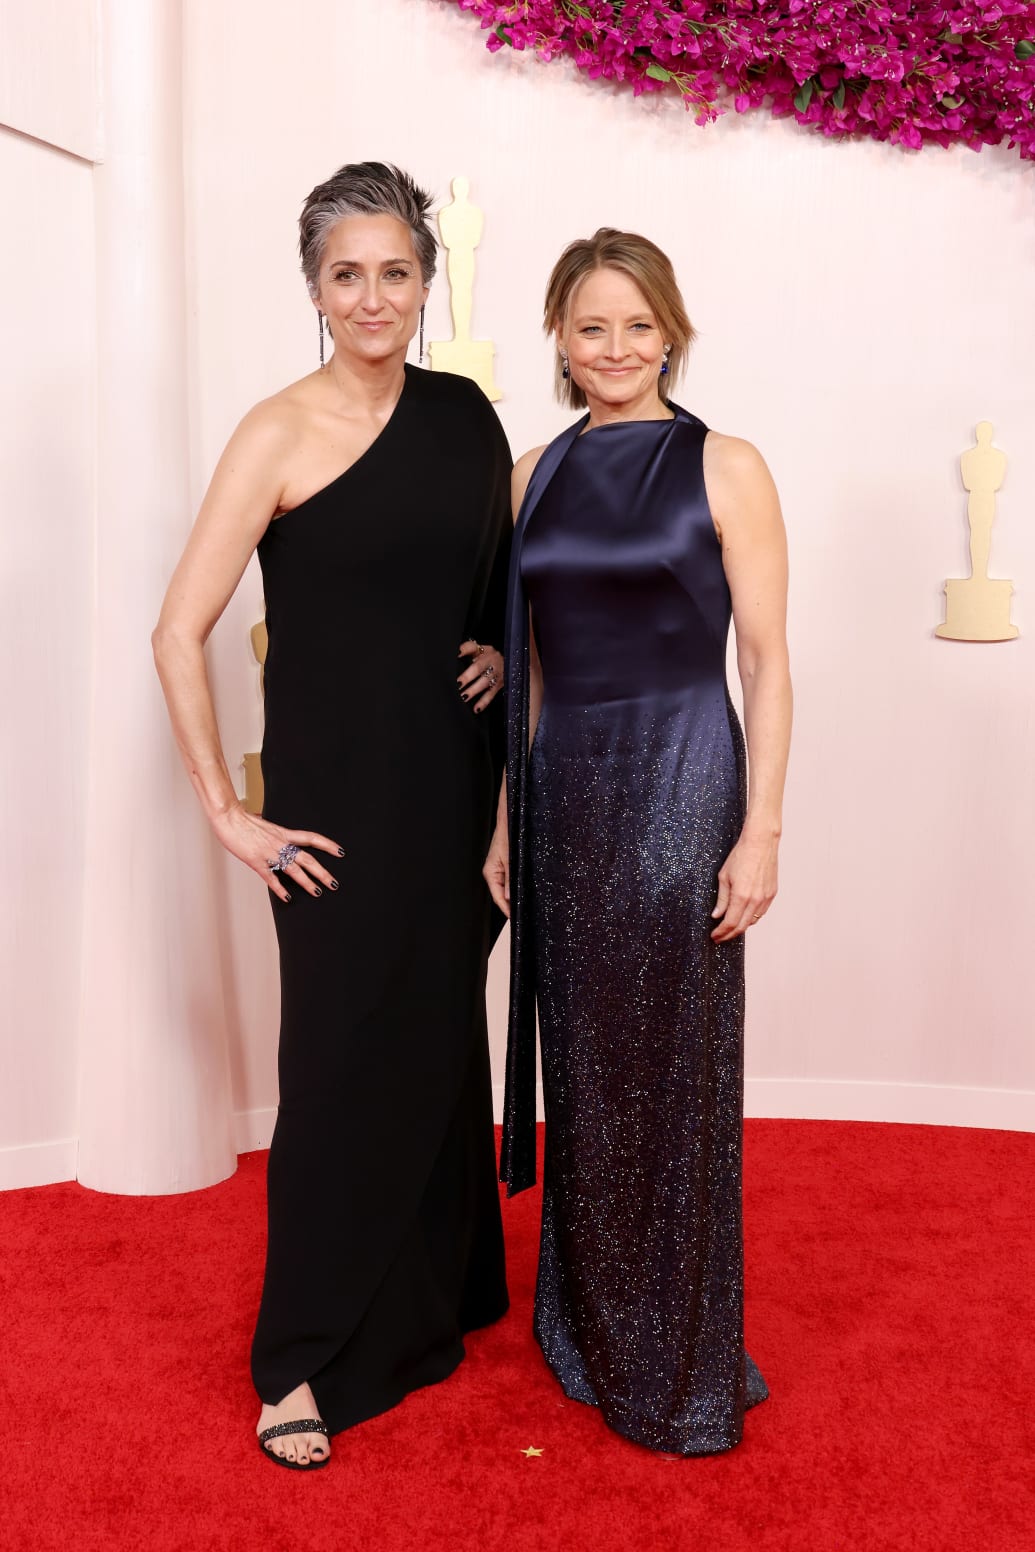 Alexandra Hedison and Jodie Foster at the Oscars 